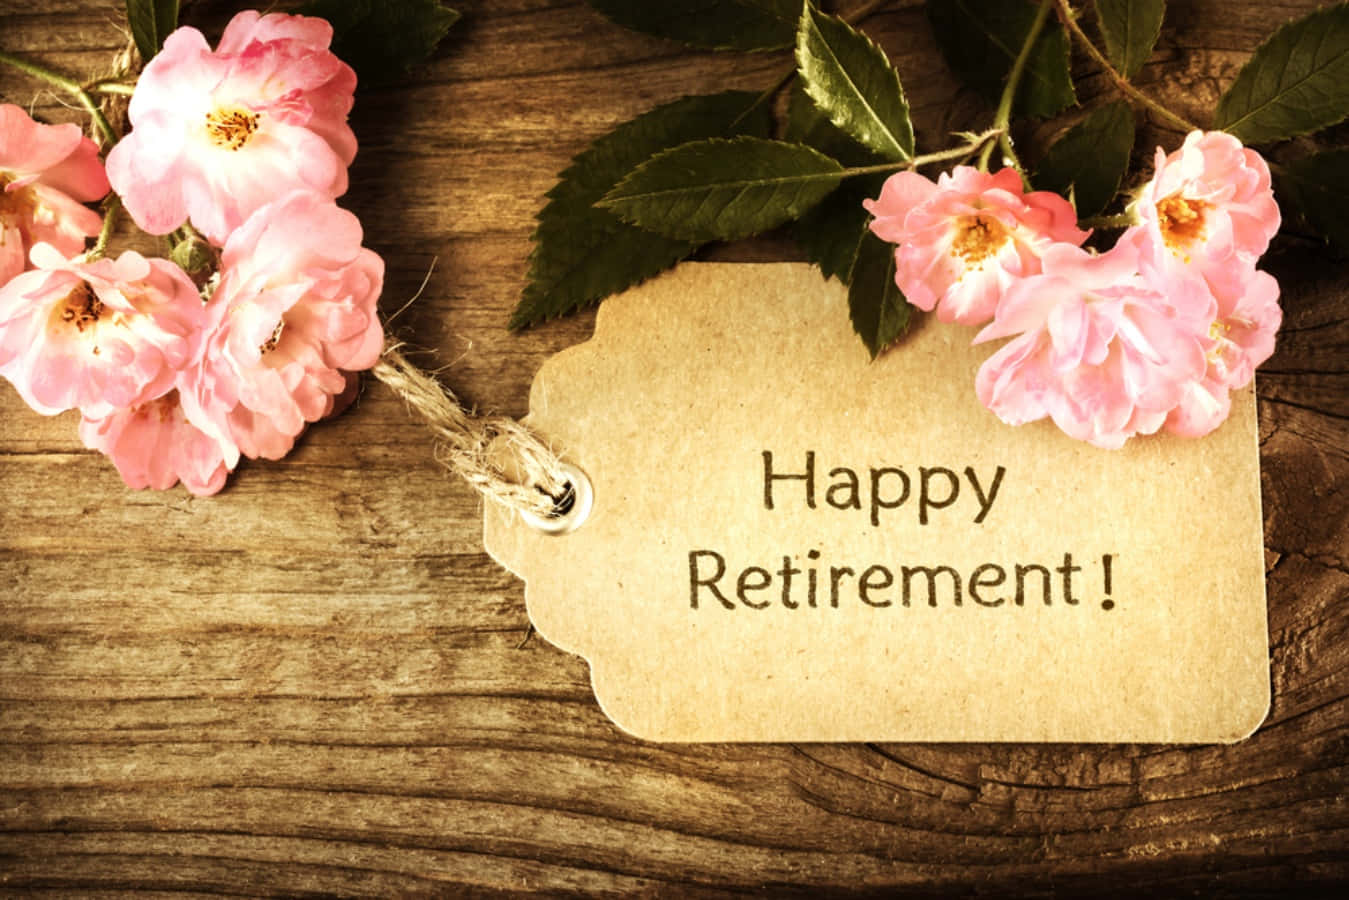 Happy Retirement Card With Flowers On A Wooden Background